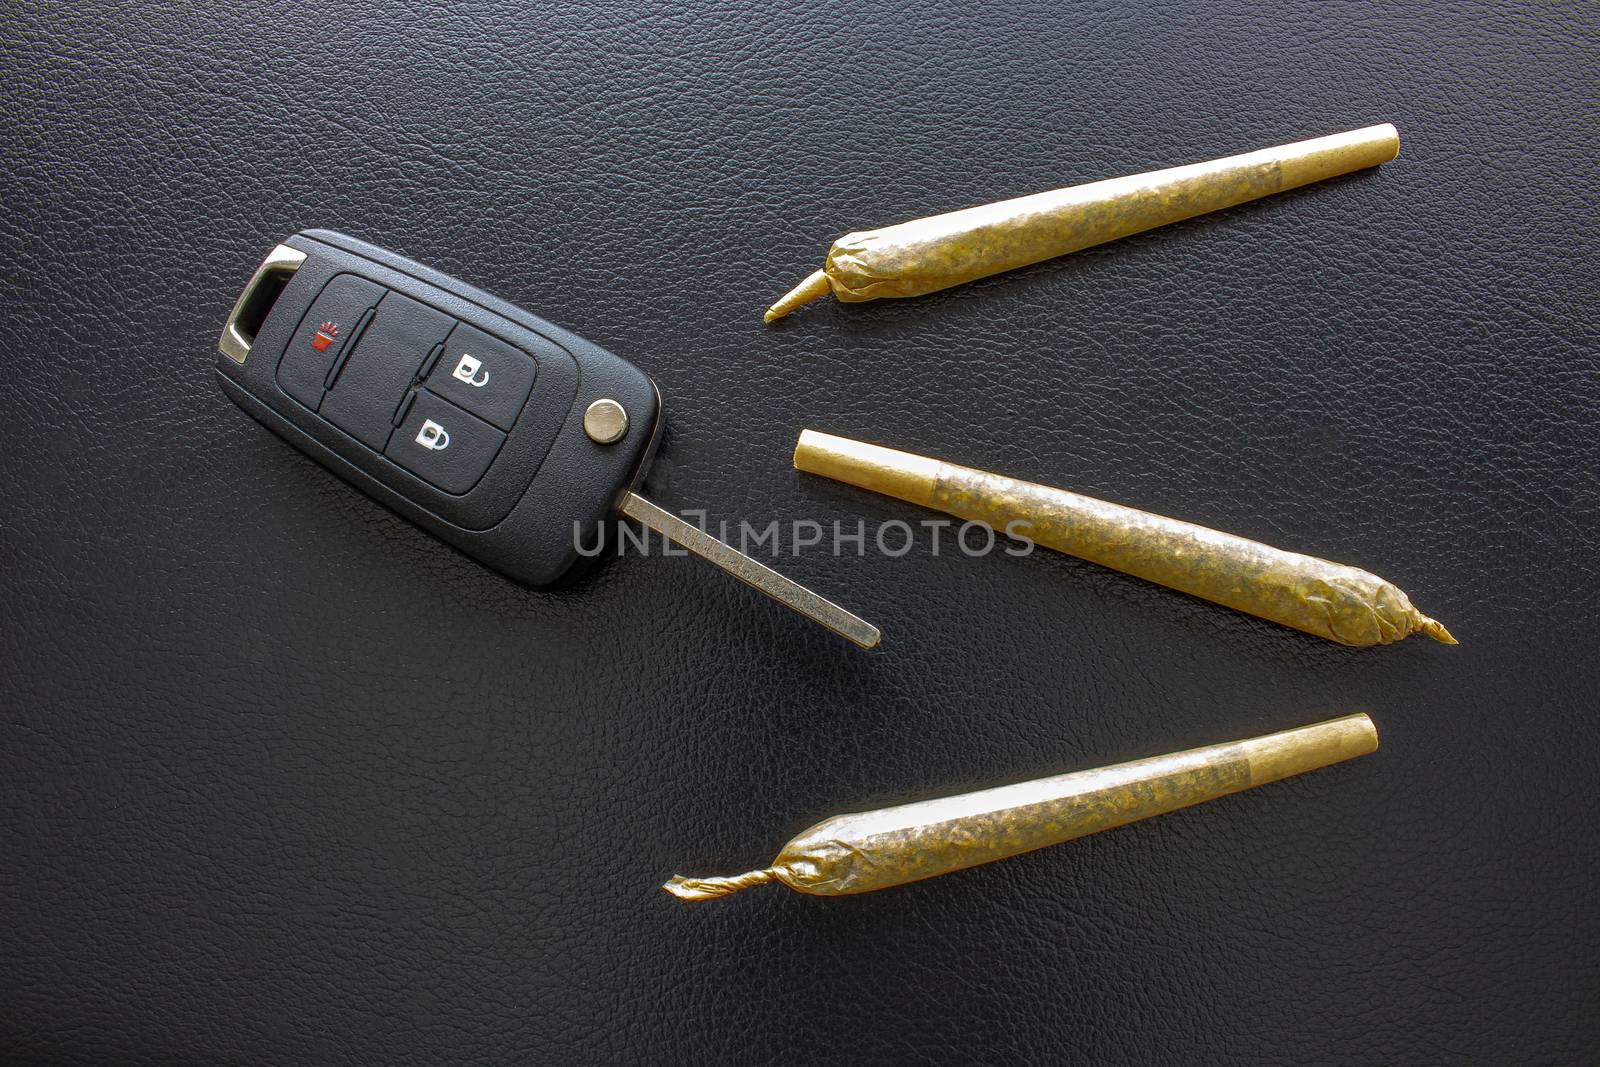 Cannabis Joints Cigarettes with car key on the side on a leather black texture. Concept driving high. Drug-impaired driving is dangerous and against the law